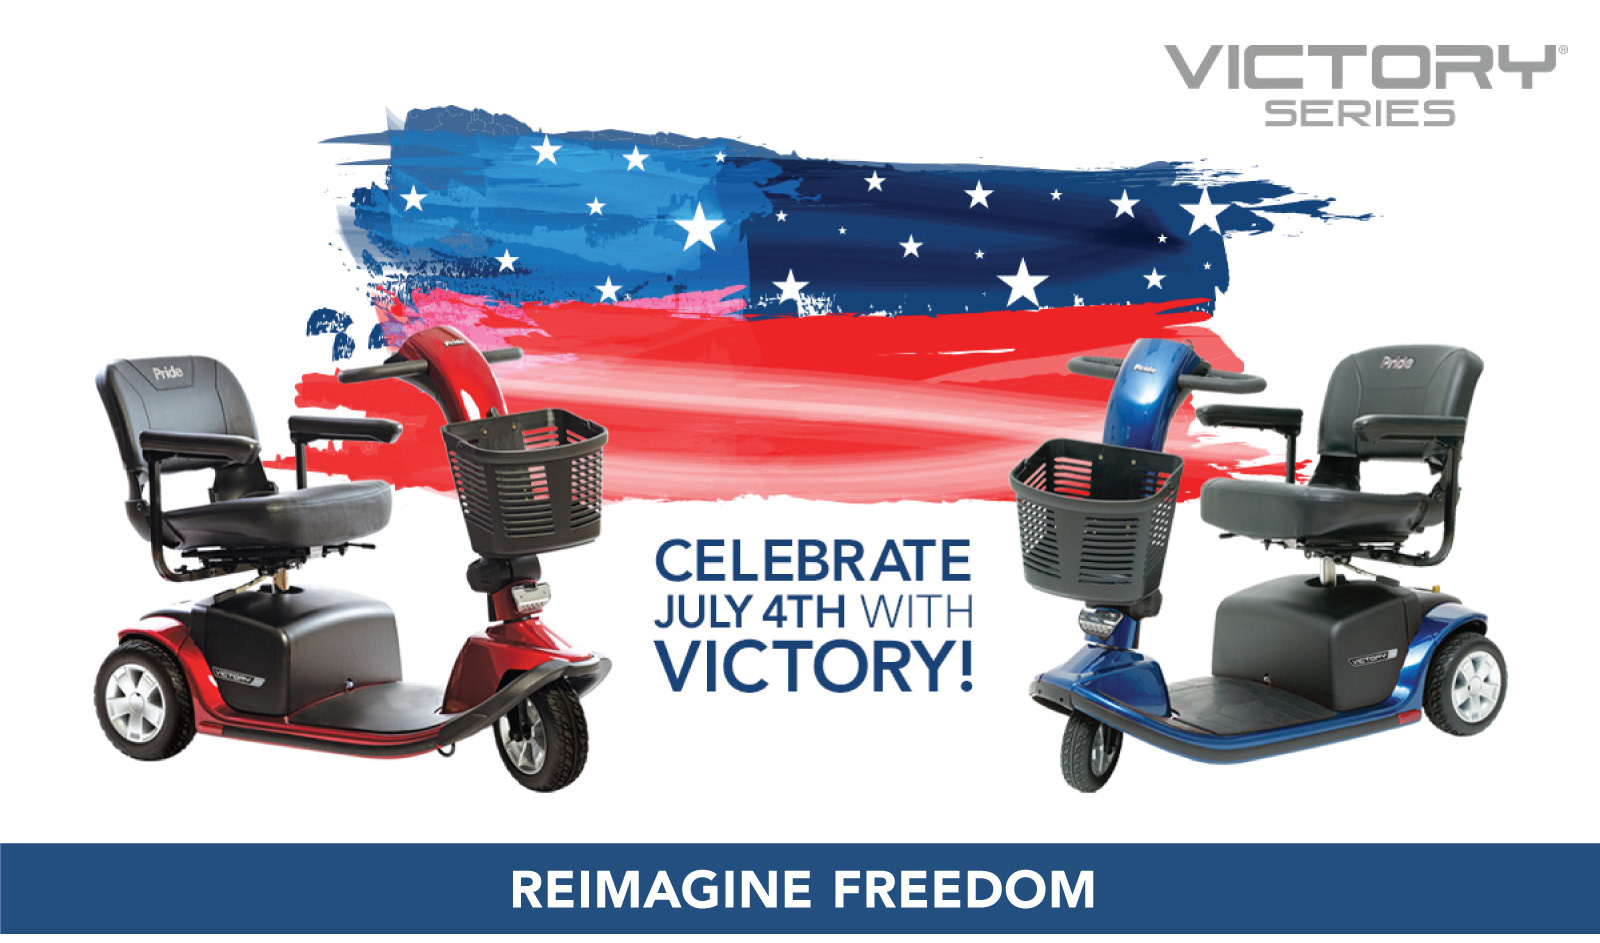 Victory Series Scooters